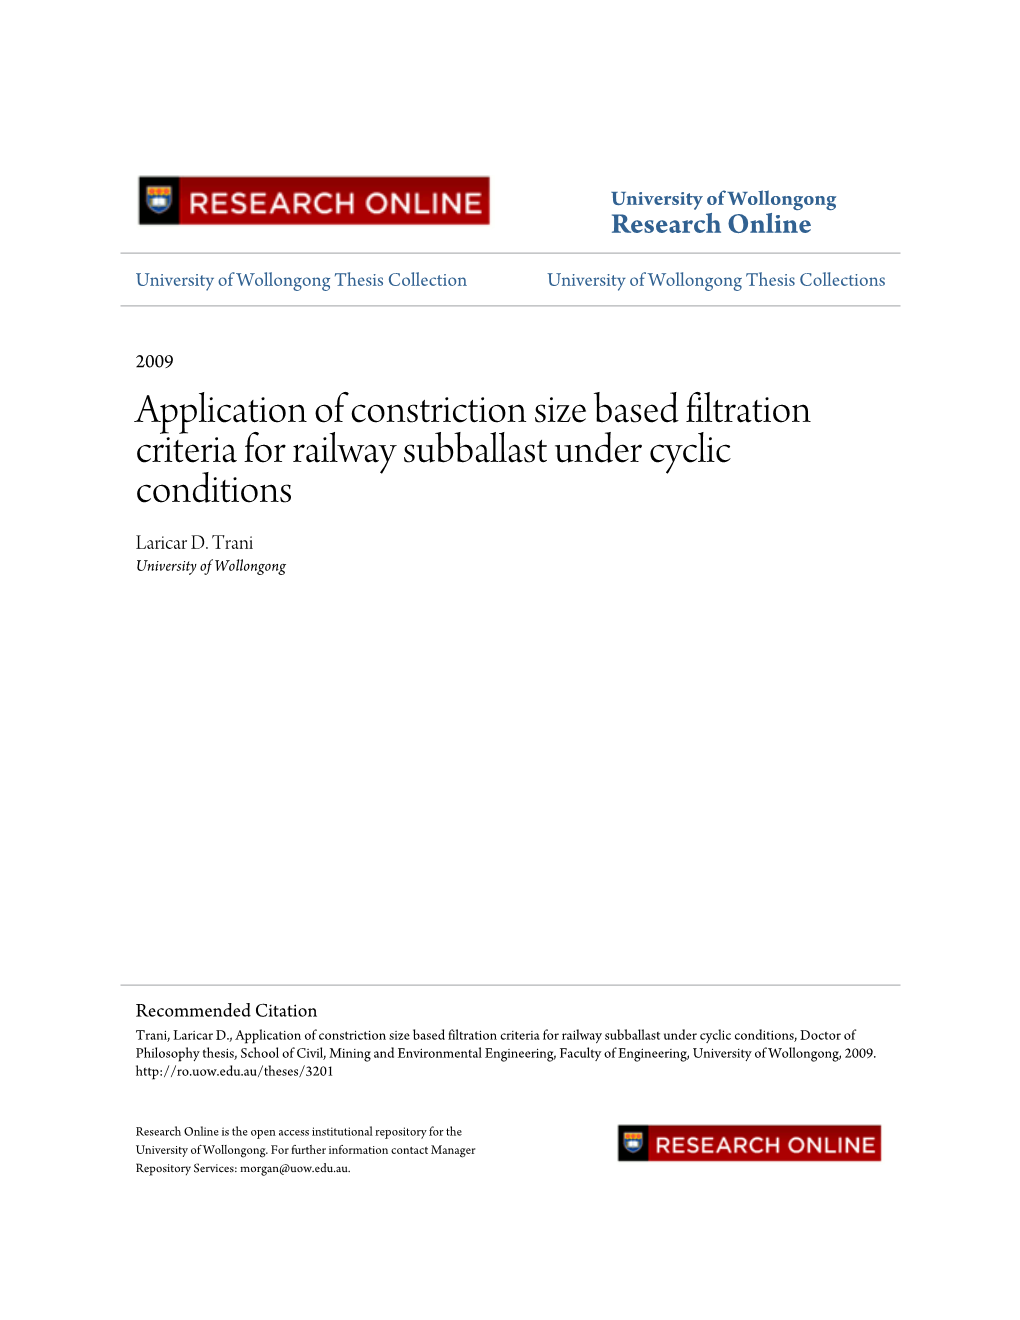 Application of Constriction Size Based Filtration Criteria for Railway Subballast Under Cyclic Conditions Laricar D